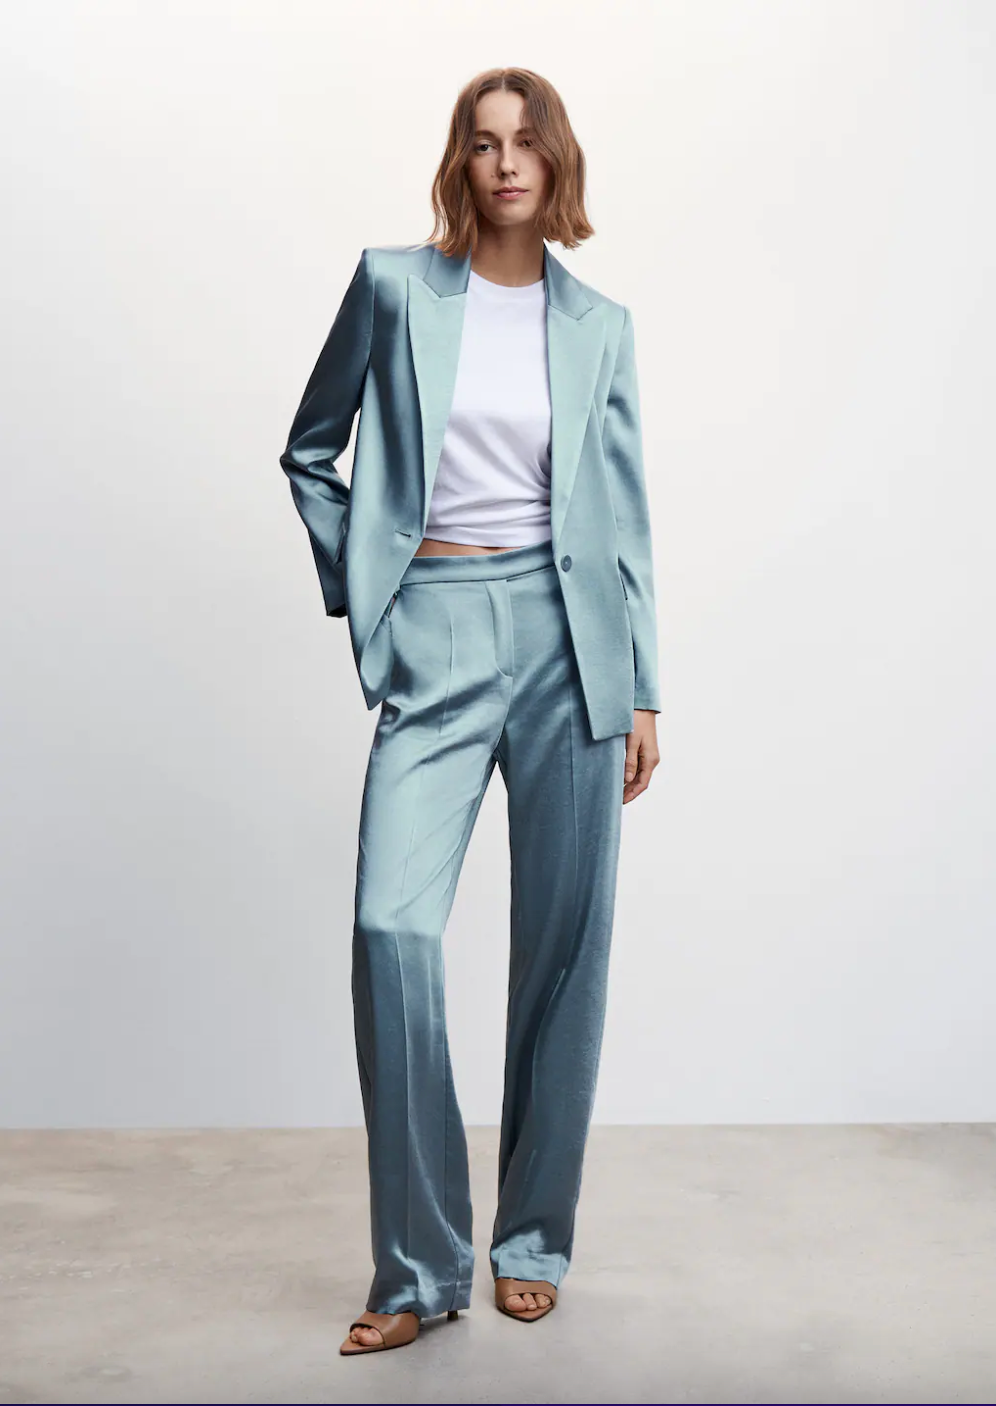 Black Chic Pants Suit for Women, Sexy Pantsuit With Blazer and